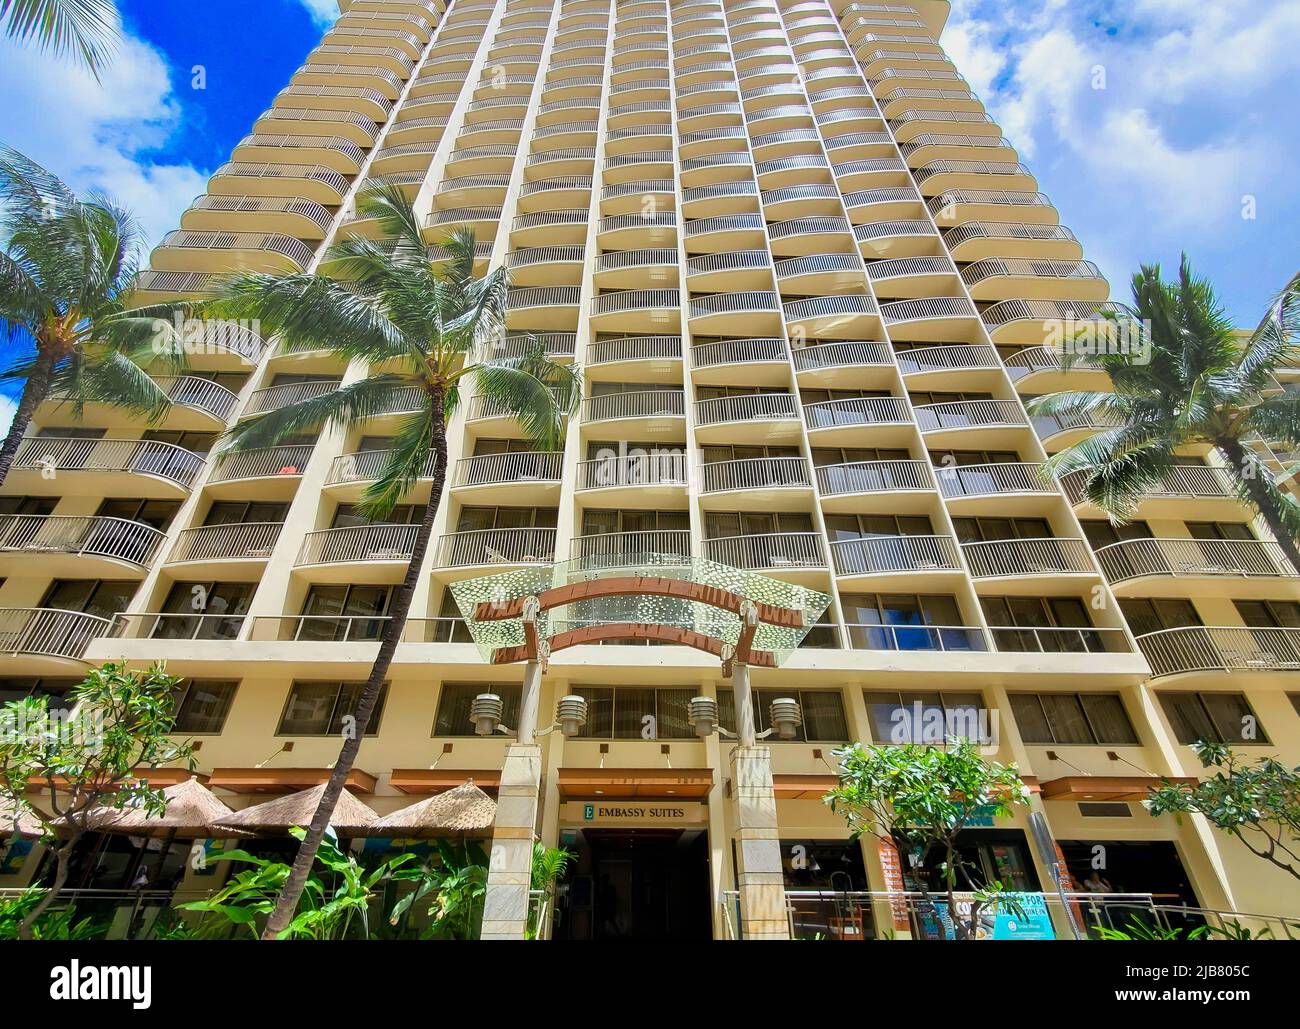 Honolulu, Hawaii USA - May 16, 2021: Photo of the hotel front exterior of the Embassy Suites by Hilton Waikiki Beach Walk. Stock Photo